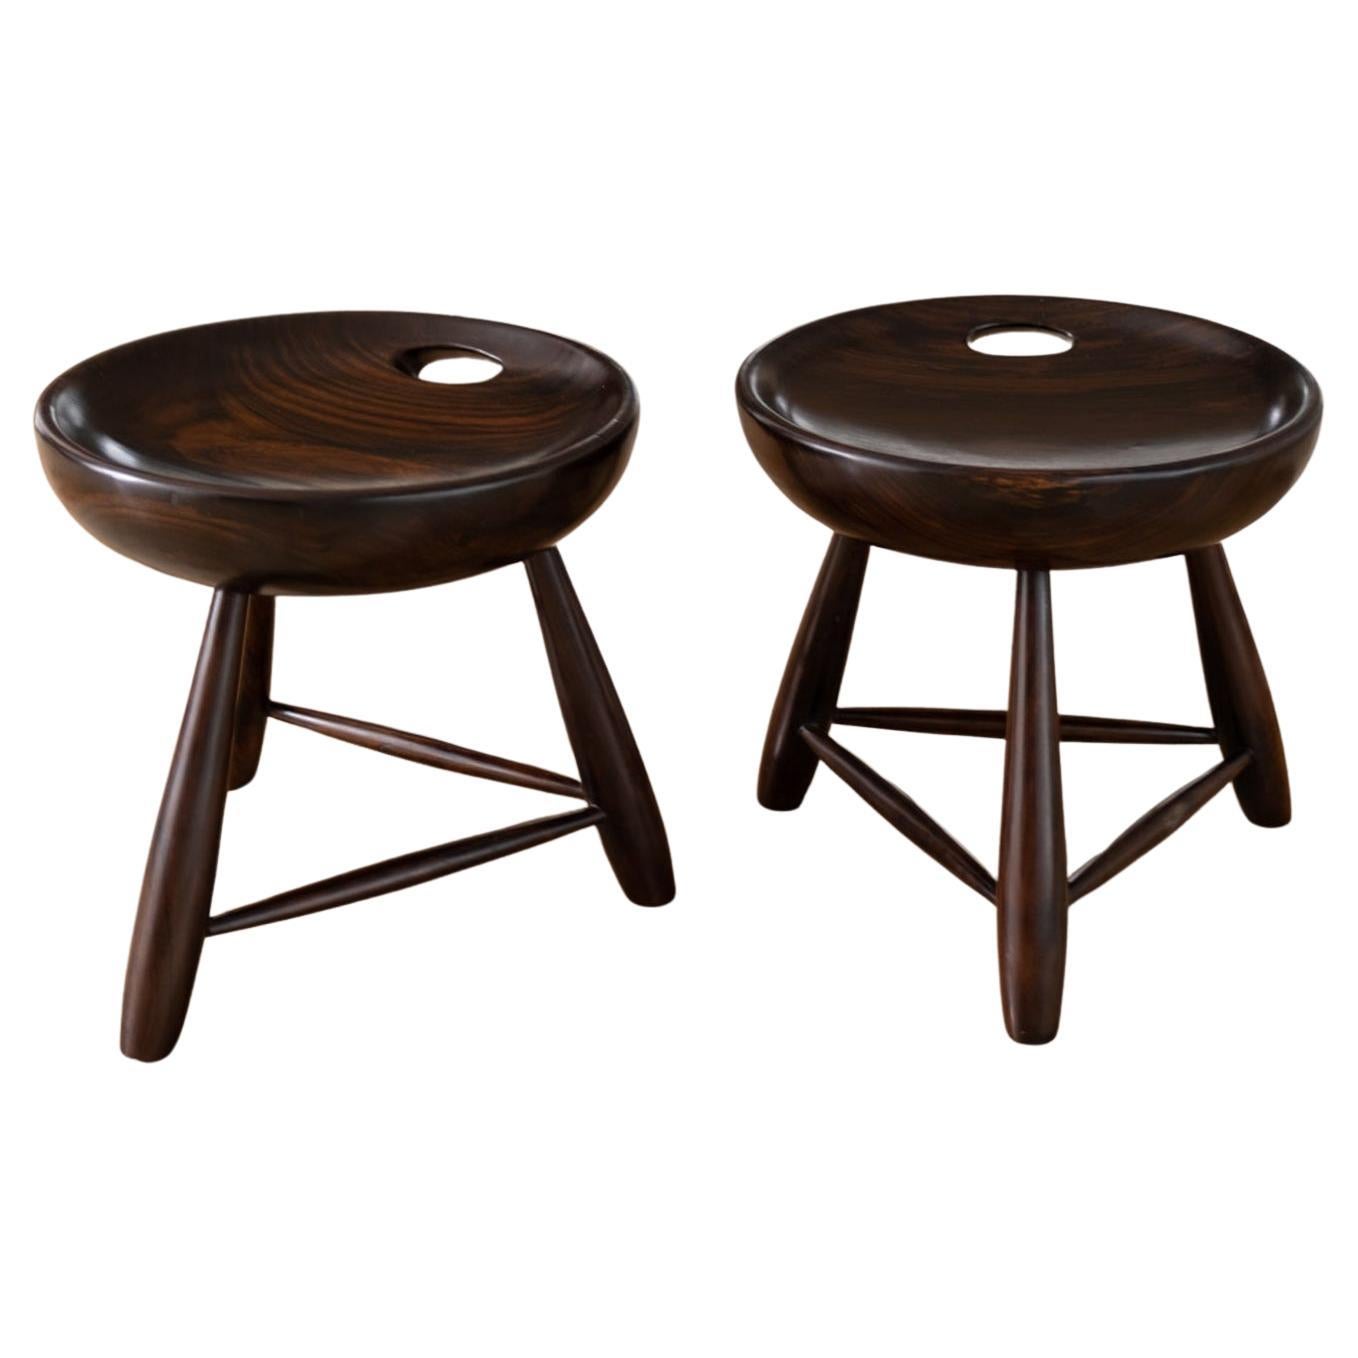 Pair of Mocho Stools by Sergio Rodrigues, Brazil 1958 For Sale